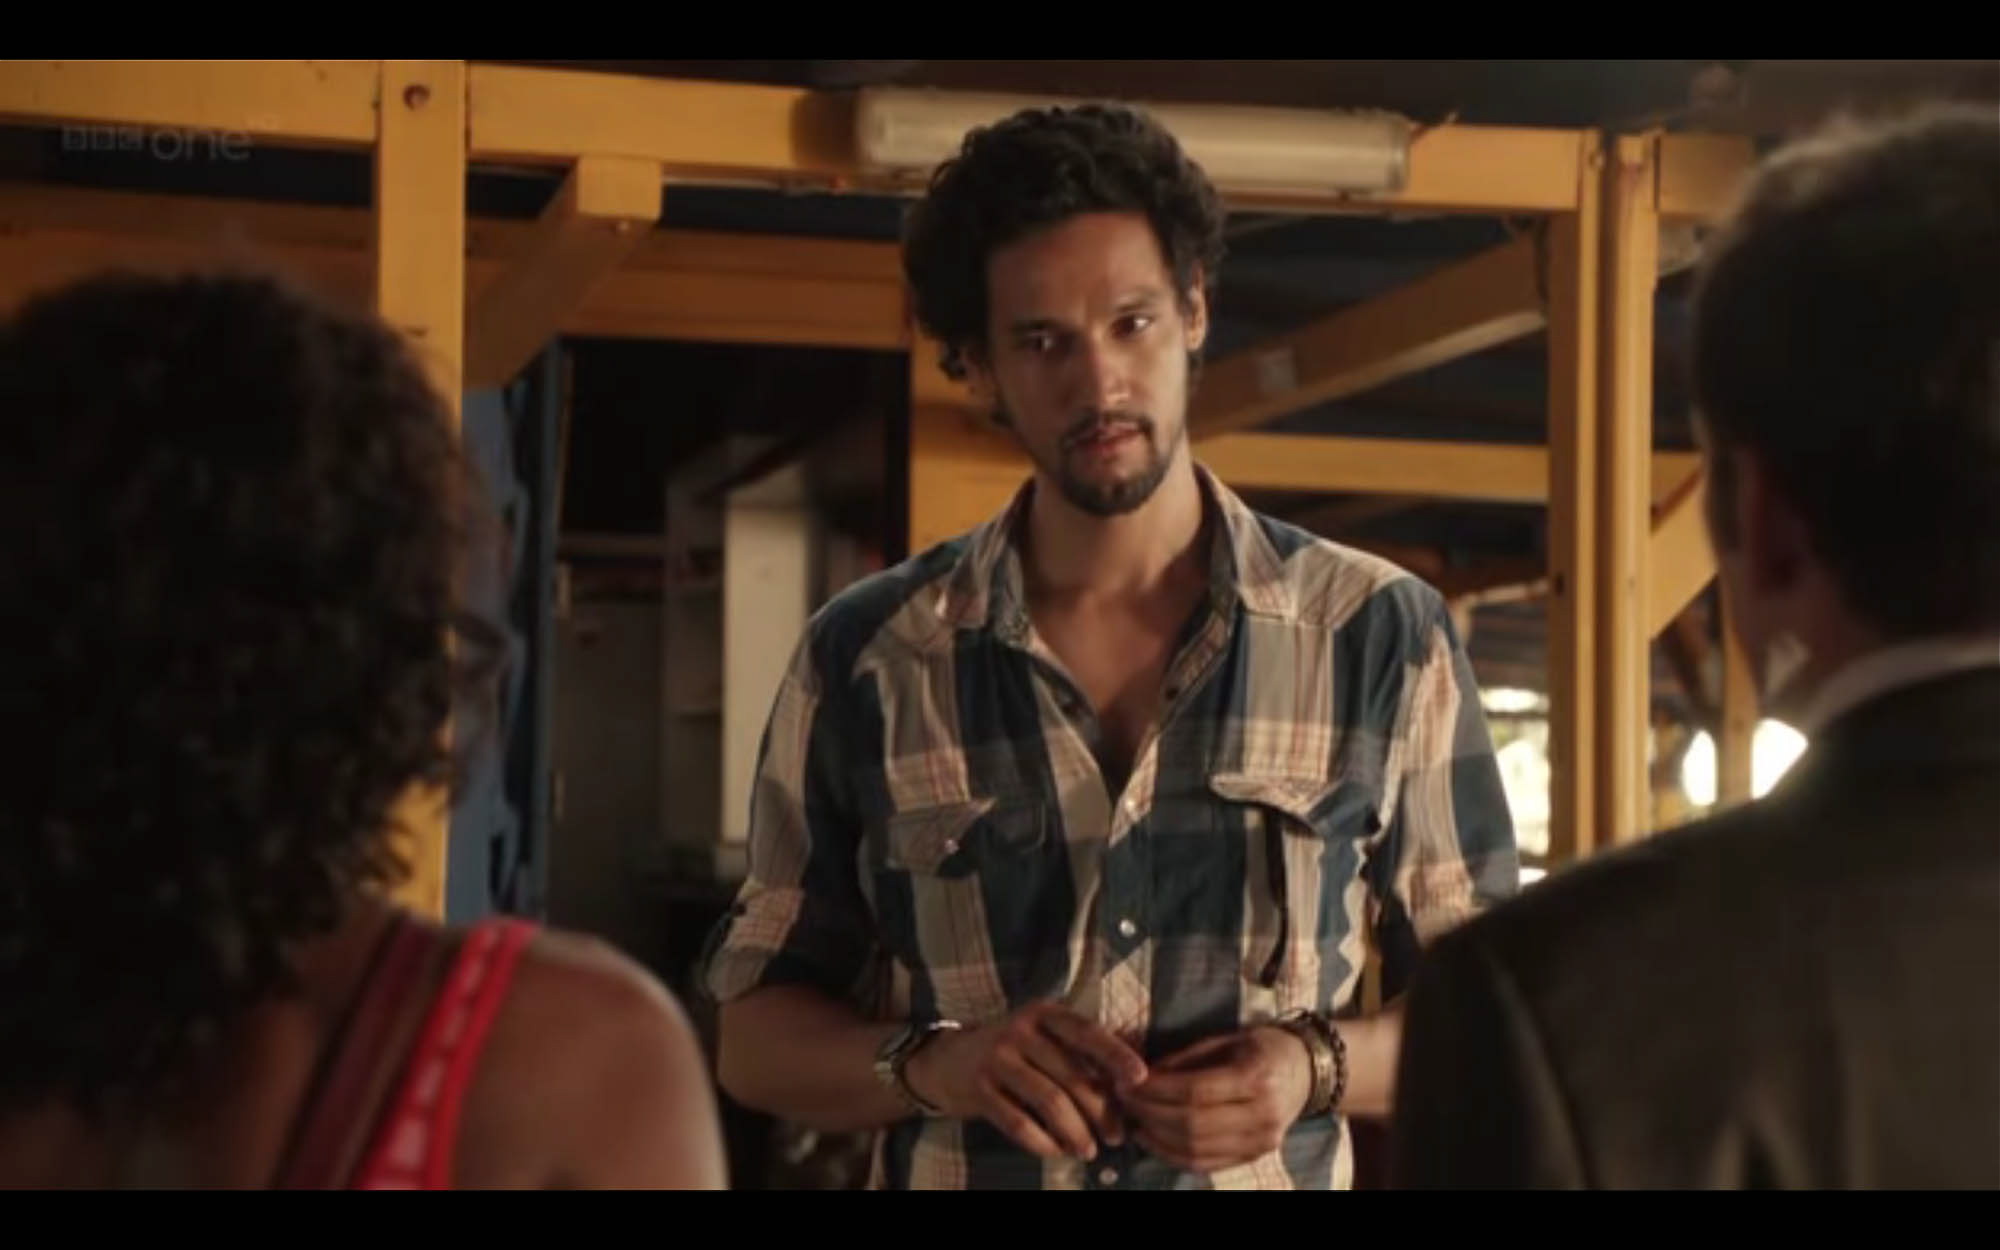 Stany Coppet as Pierre in Death In Paradise, BBC. with Sara Martins and Ben Miller